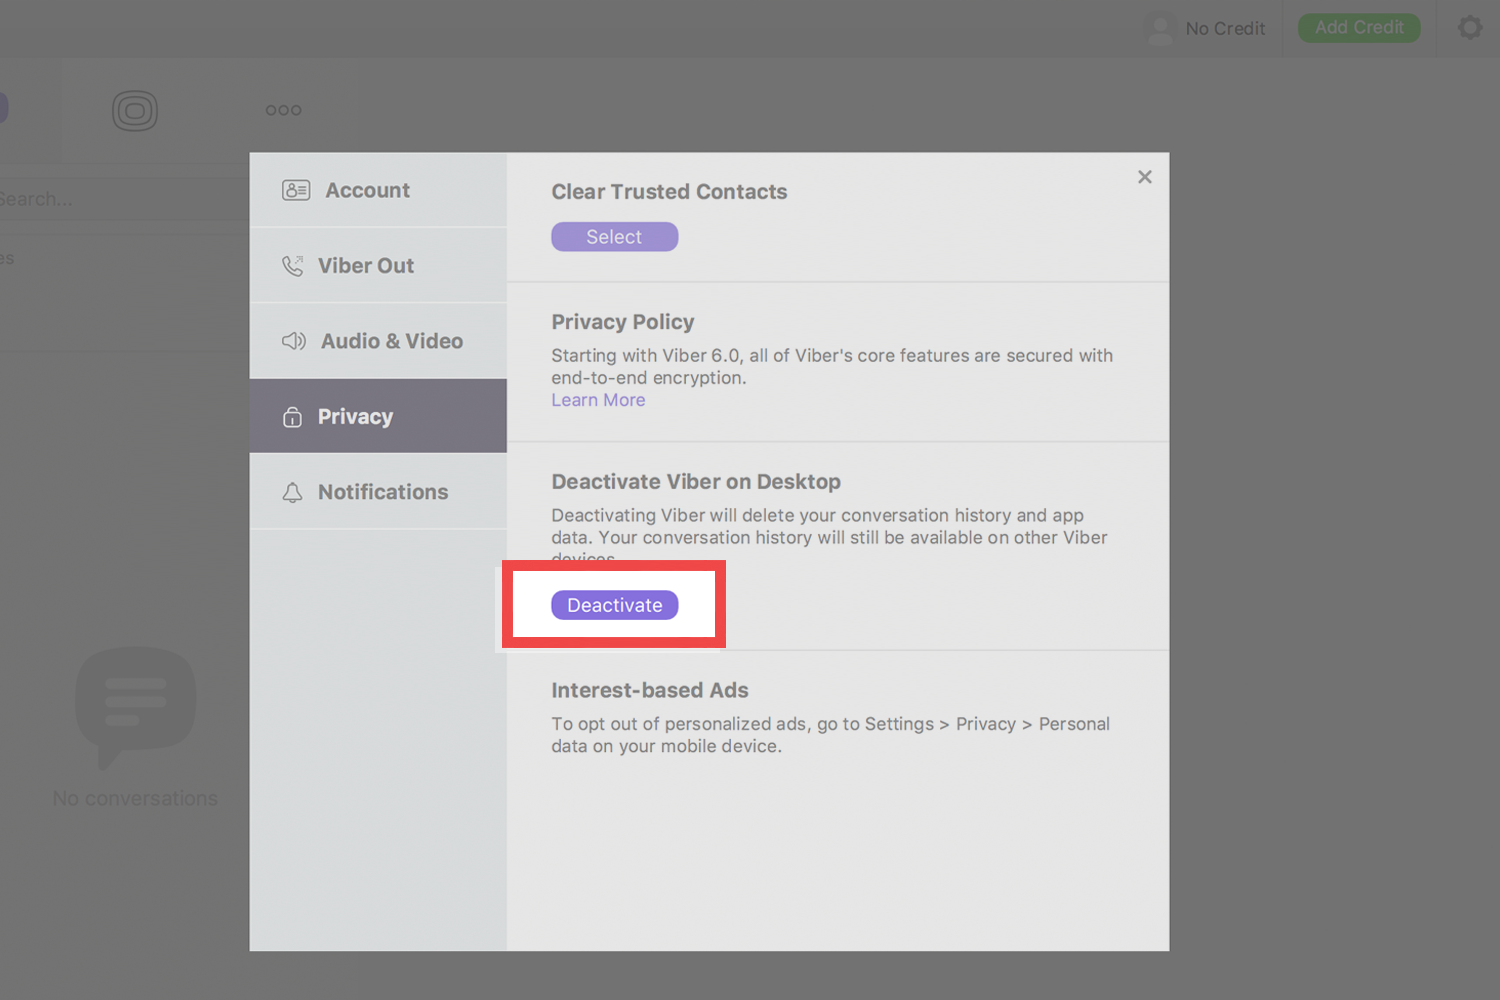 how to open viber business account